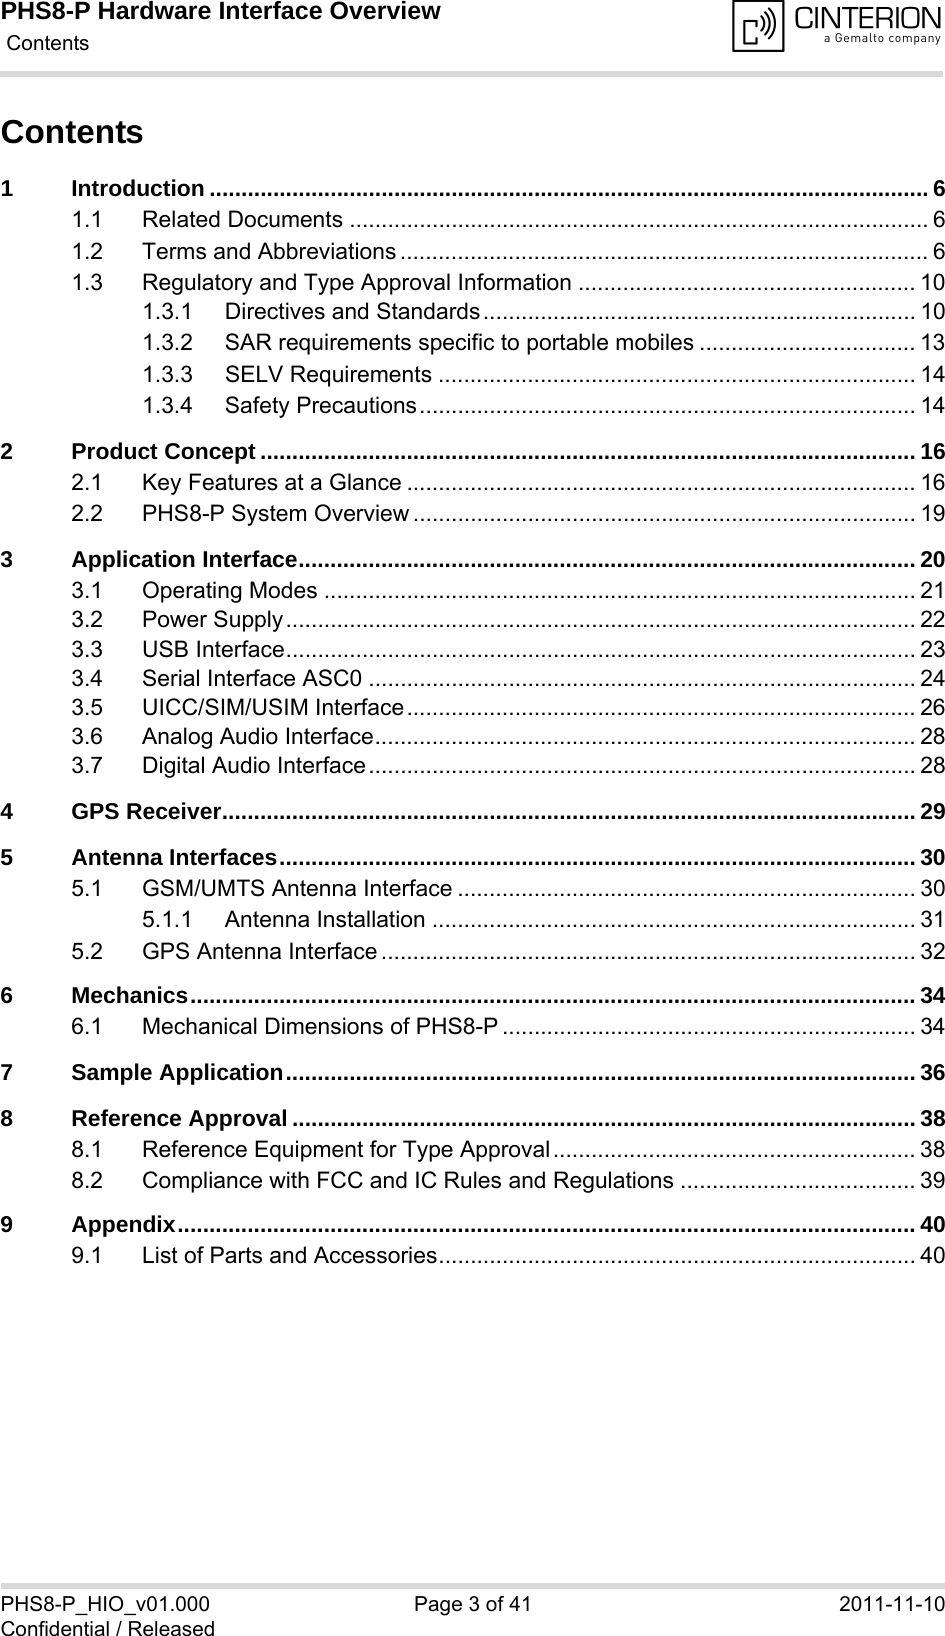 PHS8-P Hardware Interface Overview Contents41PHS8-P_HIO_v01.000 Page 3 of 41 2011-11-10Confidential / ReleasedContents1 Introduction ................................................................................................................. 61.1 Related Documents ........................................................................................... 61.2 Terms and Abbreviations ................................................................................... 61.3 Regulatory and Type Approval Information ..................................................... 101.3.1 Directives and Standards.................................................................... 101.3.2 SAR requirements specific to portable mobiles .................................. 131.3.3 SELV Requirements ........................................................................... 141.3.4 Safety Precautions.............................................................................. 142 Product Concept ....................................................................................................... 162.1 Key Features at a Glance ................................................................................ 162.2 PHS8-P System Overview ............................................................................... 193 Application Interface................................................................................................. 203.1 Operating Modes ............................................................................................. 213.2 Power Supply................................................................................................... 223.3 USB Interface................................................................................................... 233.4 Serial Interface ASC0 ...................................................................................... 243.5 UICC/SIM/USIM Interface................................................................................ 263.6 Analog Audio Interface..................................................................................... 283.7 Digital Audio Interface...................................................................................... 284 GPS Receiver............................................................................................................. 295 Antenna Interfaces.................................................................................................... 305.1 GSM/UMTS Antenna Interface ........................................................................ 305.1.1 Antenna Installation ............................................................................ 315.2 GPS Antenna Interface .................................................................................... 326 Mechanics.................................................................................................................. 346.1 Mechanical Dimensions of PHS8-P ................................................................. 347 Sample Application................................................................................................... 368 Reference Approval .................................................................................................. 388.1 Reference Equipment for Type Approval......................................................... 388.2 Compliance with FCC and IC Rules and Regulations ..................................... 399 Appendix.................................................................................................................... 409.1 List of Parts and Accessories........................................................................... 40